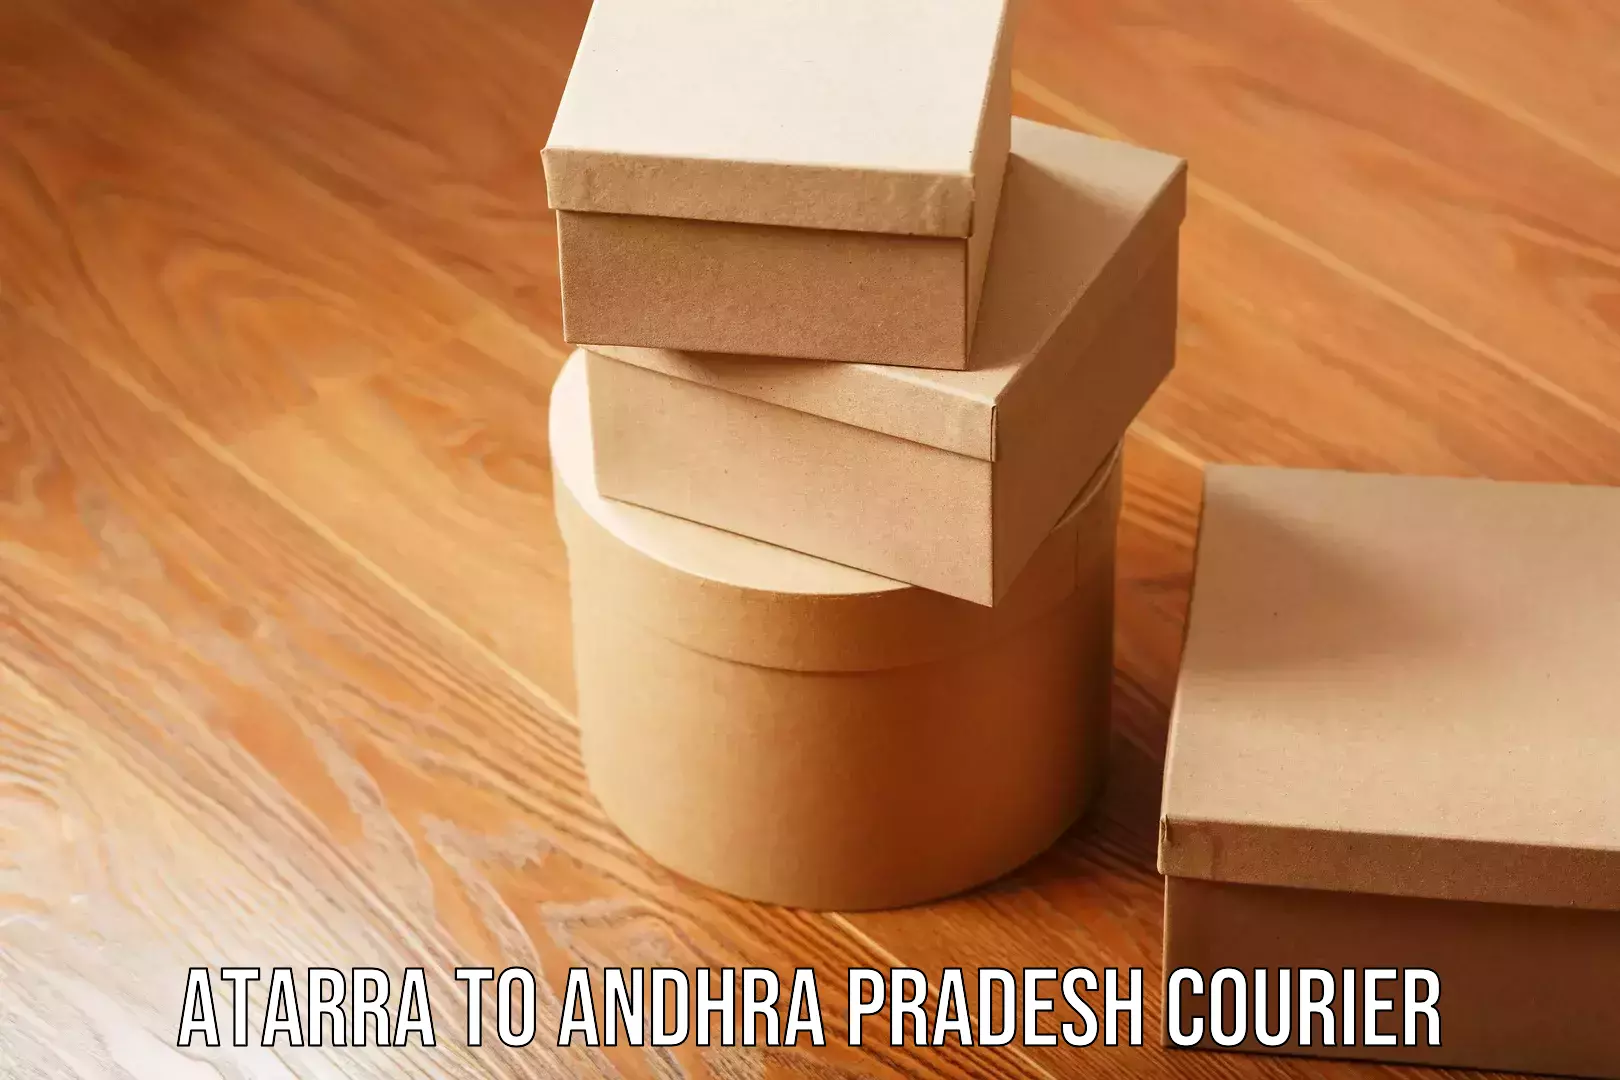 Next-day delivery options Atarra to Andhra Pradesh